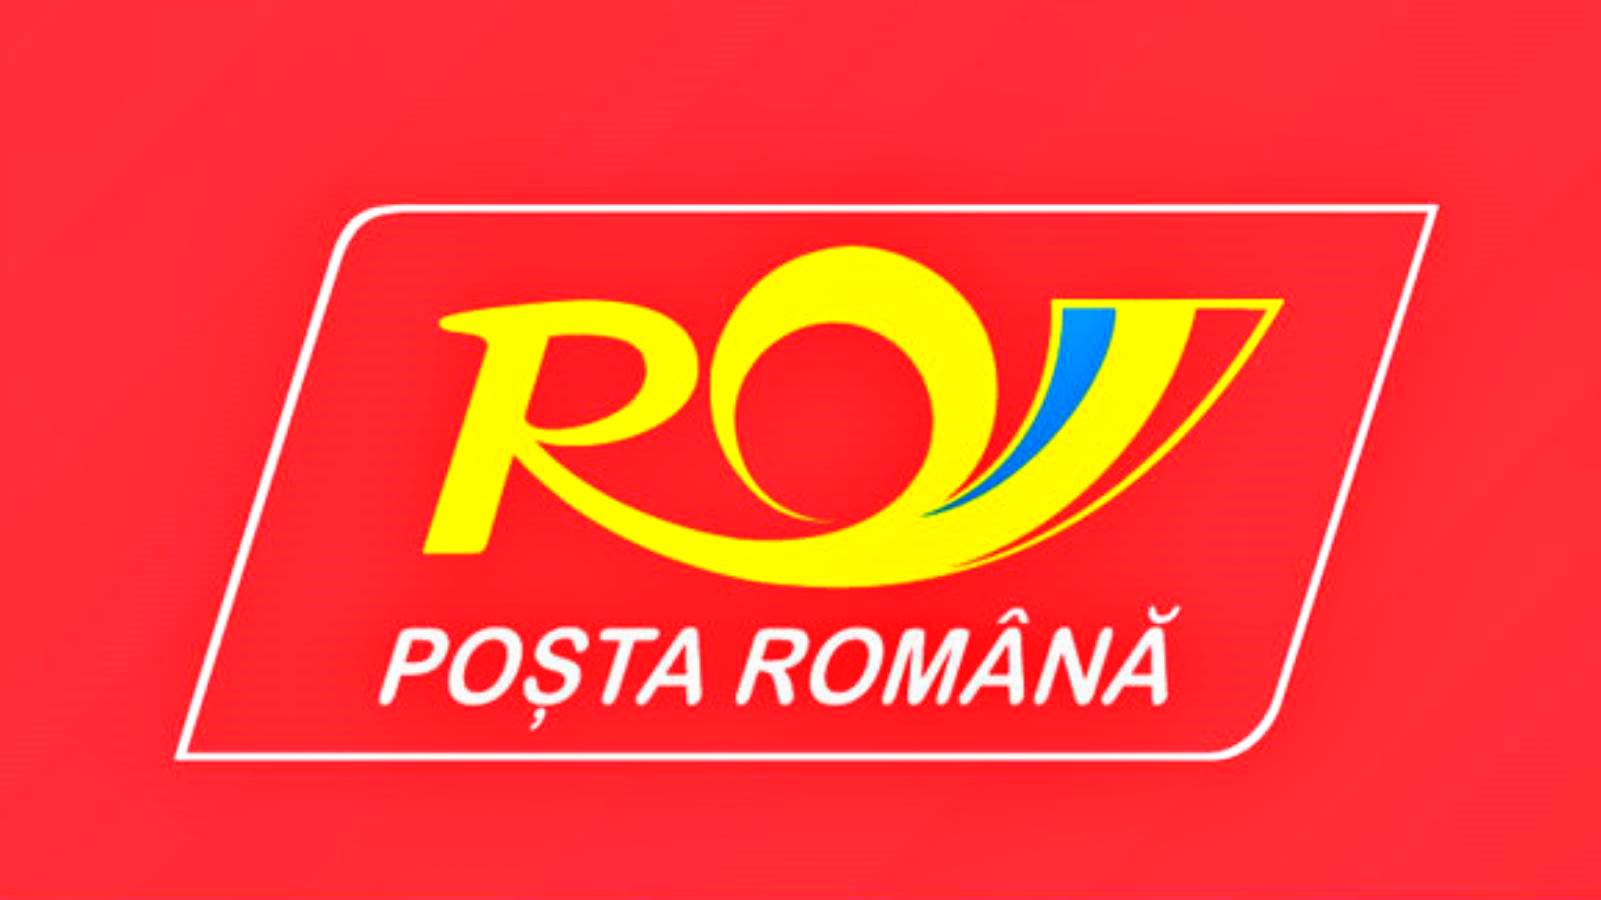 At the beginning of 2023, the Romanian Post is talking about the achievements of 2022